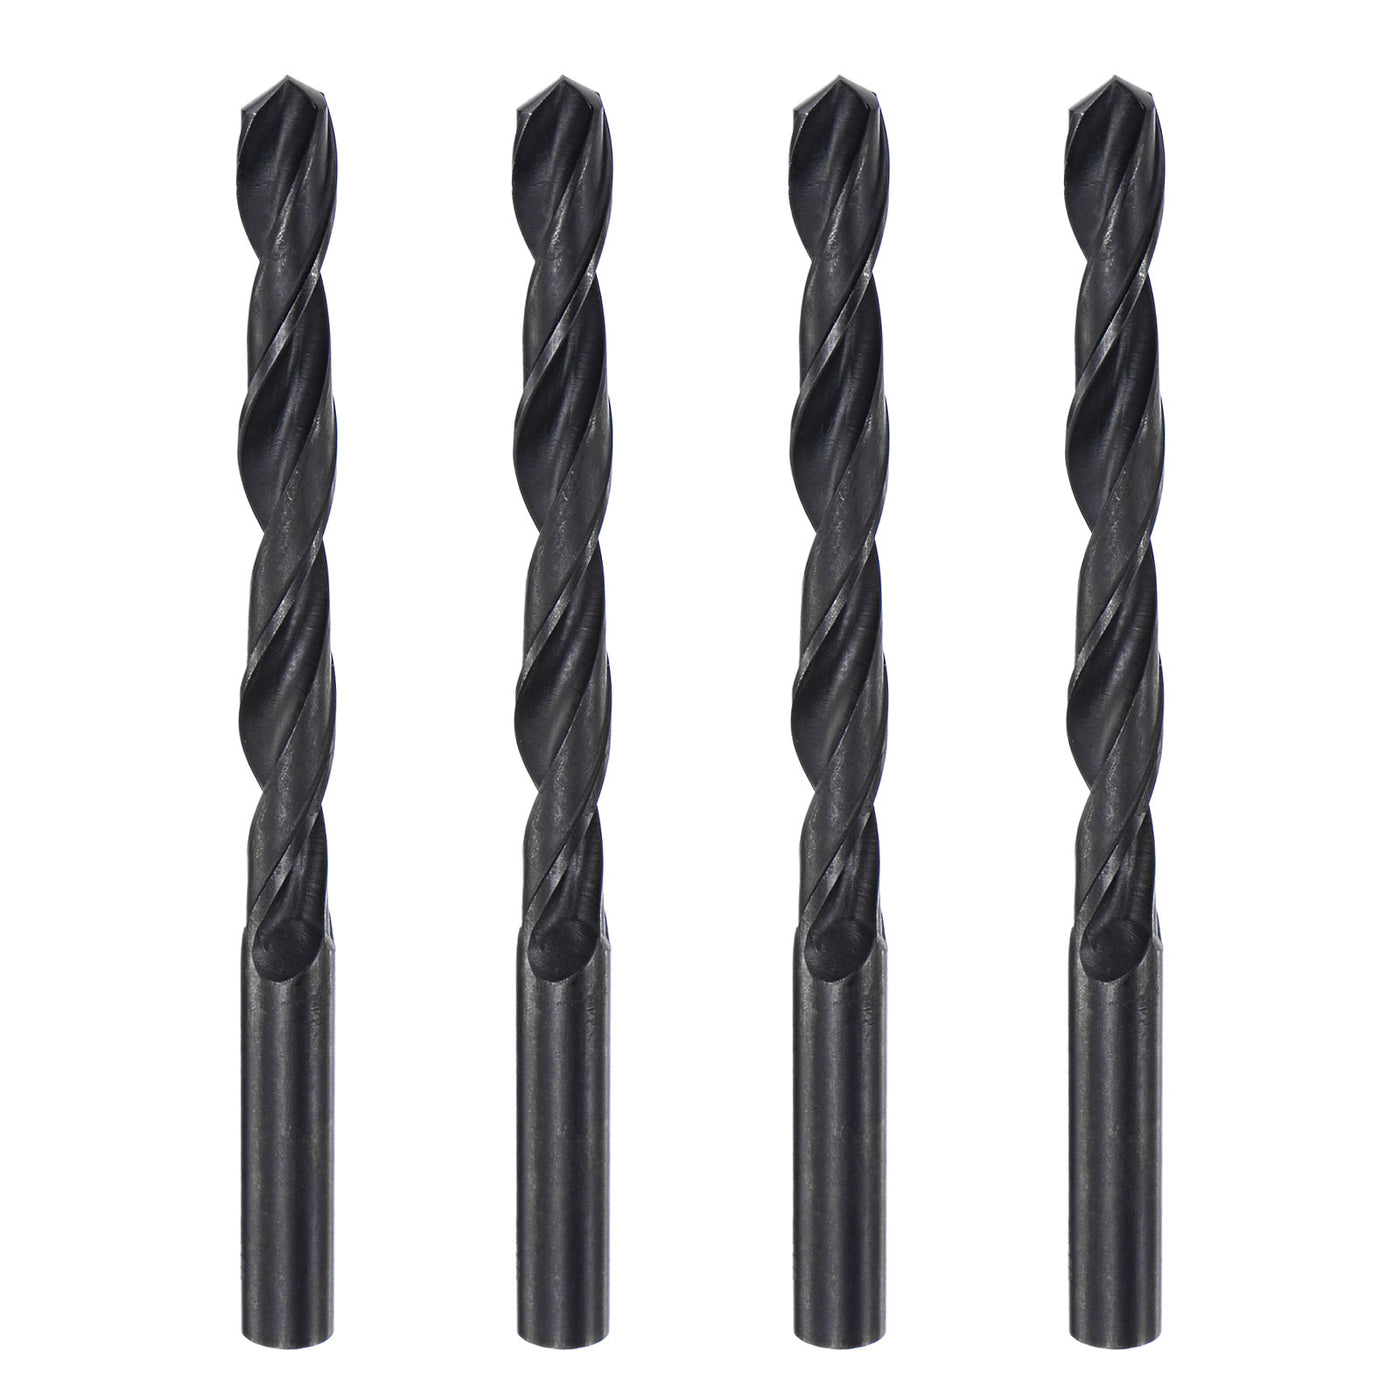 uxcell Uxcell High Speed Steel Twist Drill Bit, 8.5mm Fully Ground Black Oxide 115mm Long 4Pcs